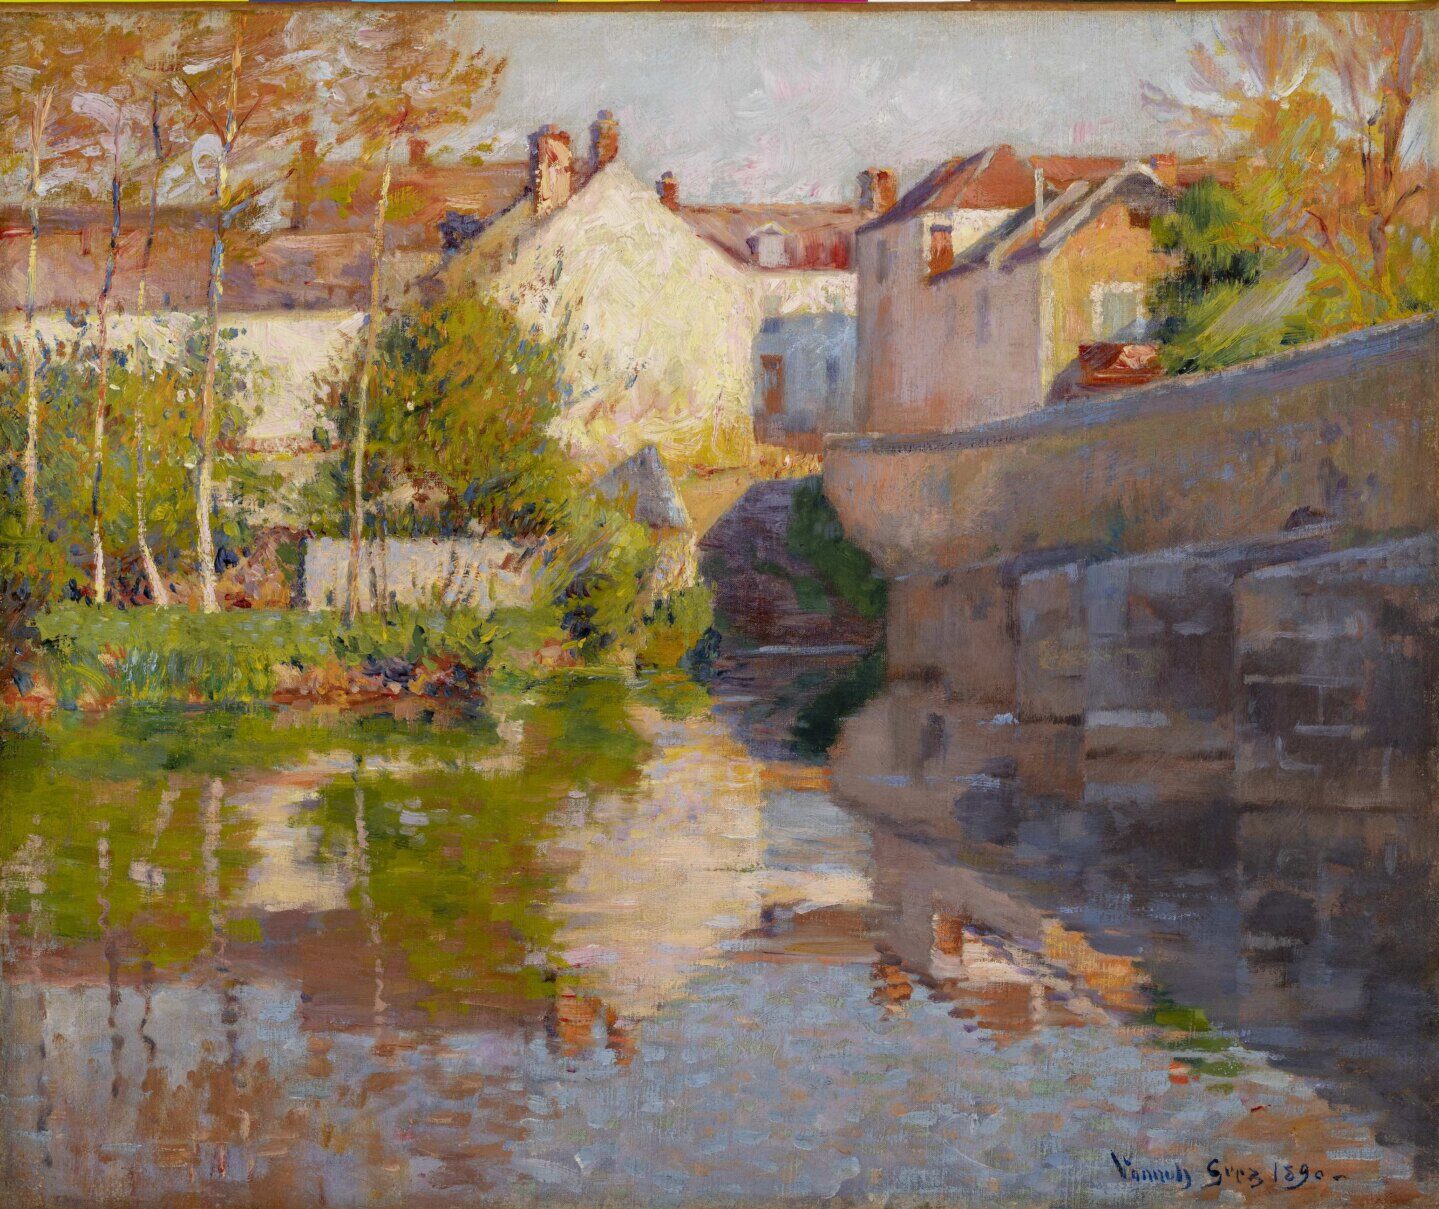 Impressionism 150: From Paris to Connecticut & Beyond